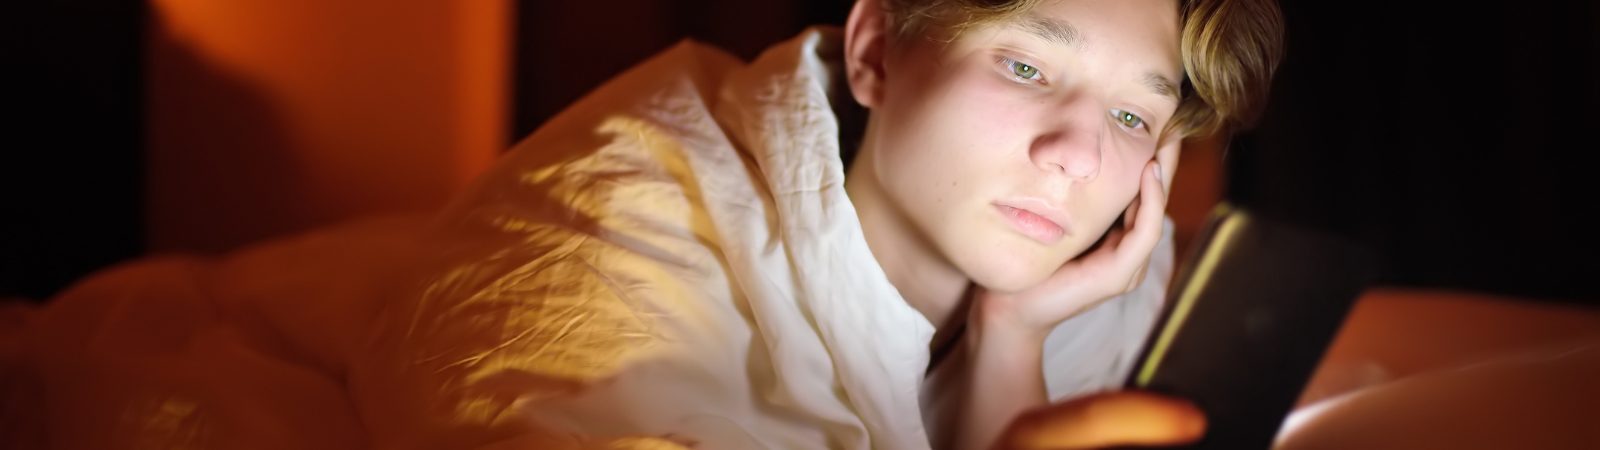 Teen boy laying on bed looking at internet on phone